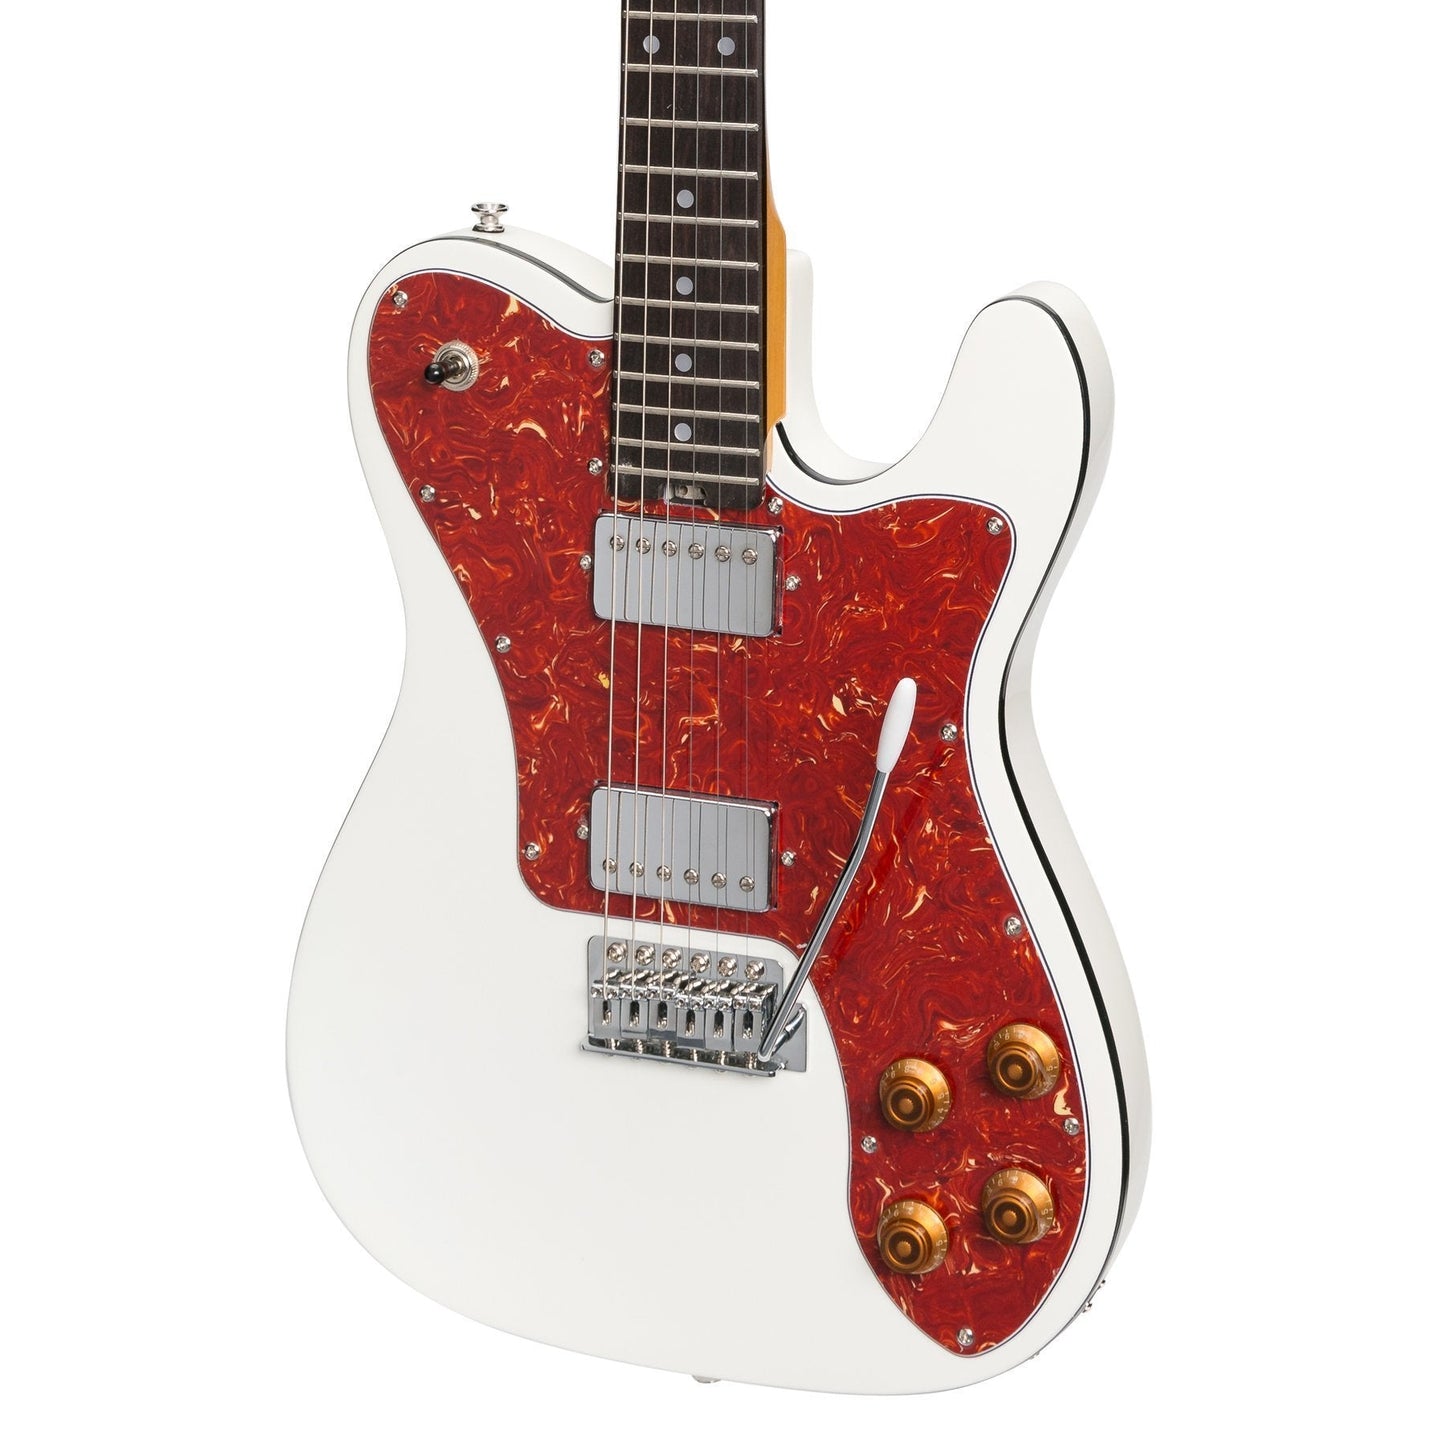 J&D Luthiers Deluxe TE-Style Electric Guitar (White)